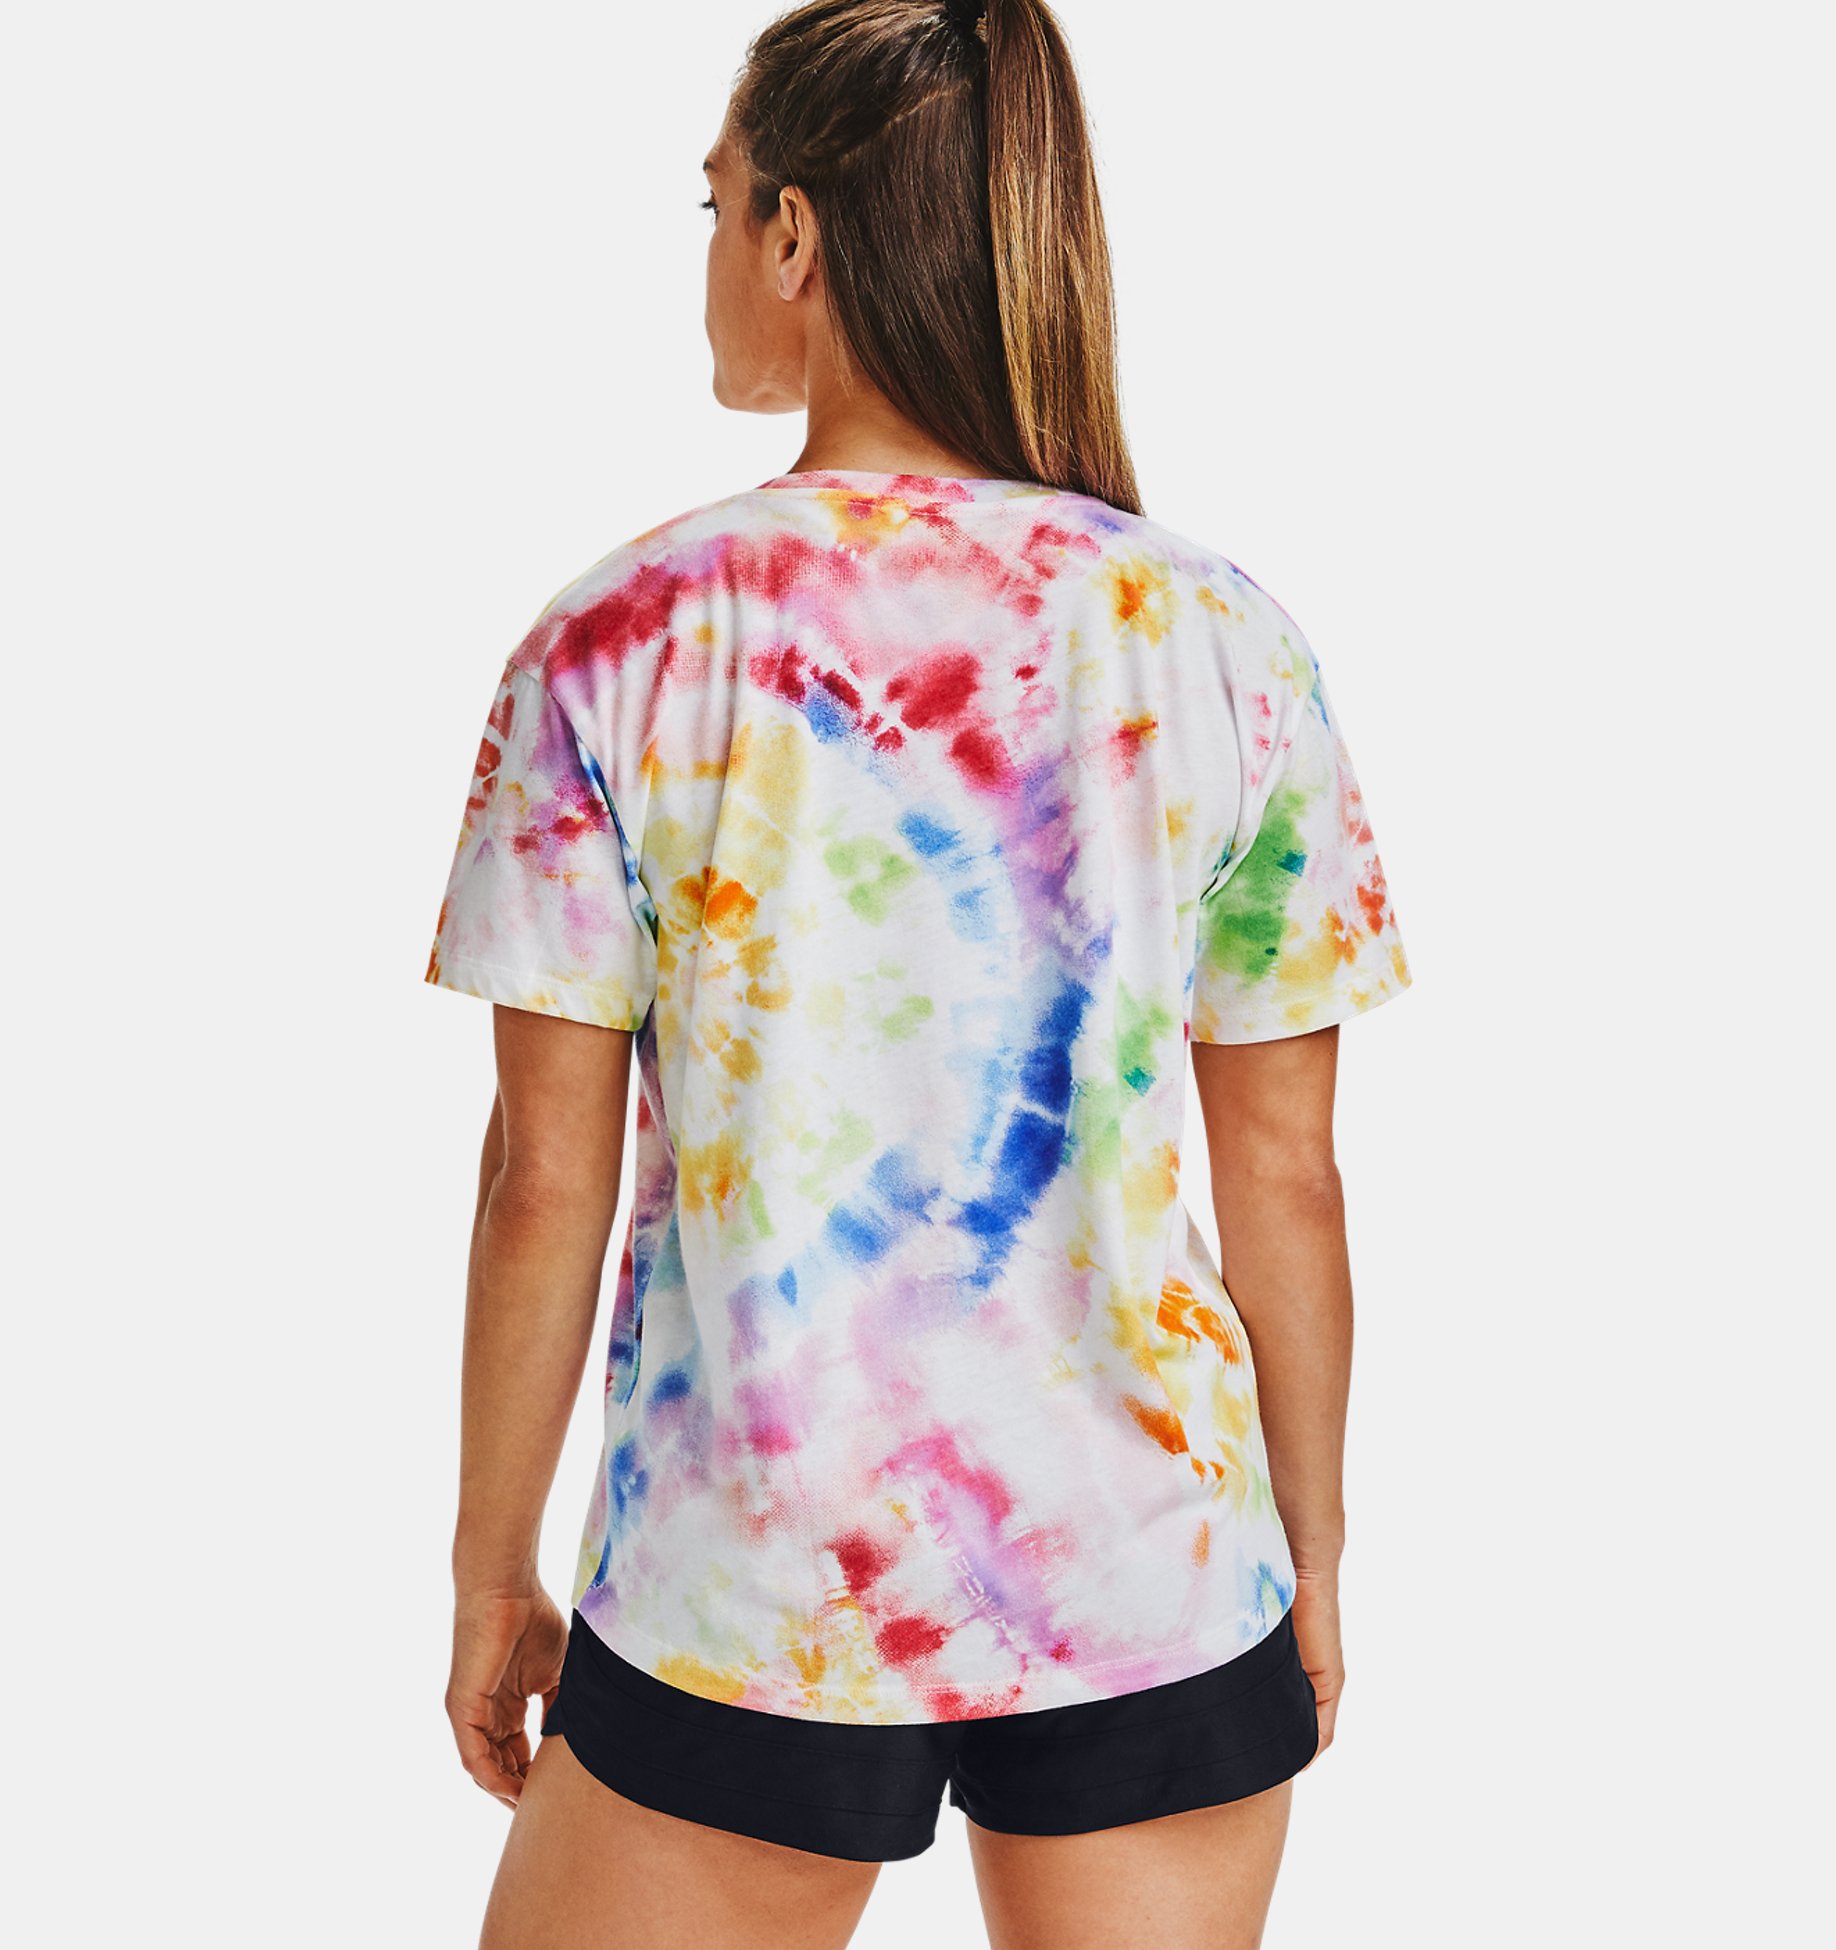 Under Armour Pride Fashion T Shirt Ladies United Graphic Die Loose Fit Tee 